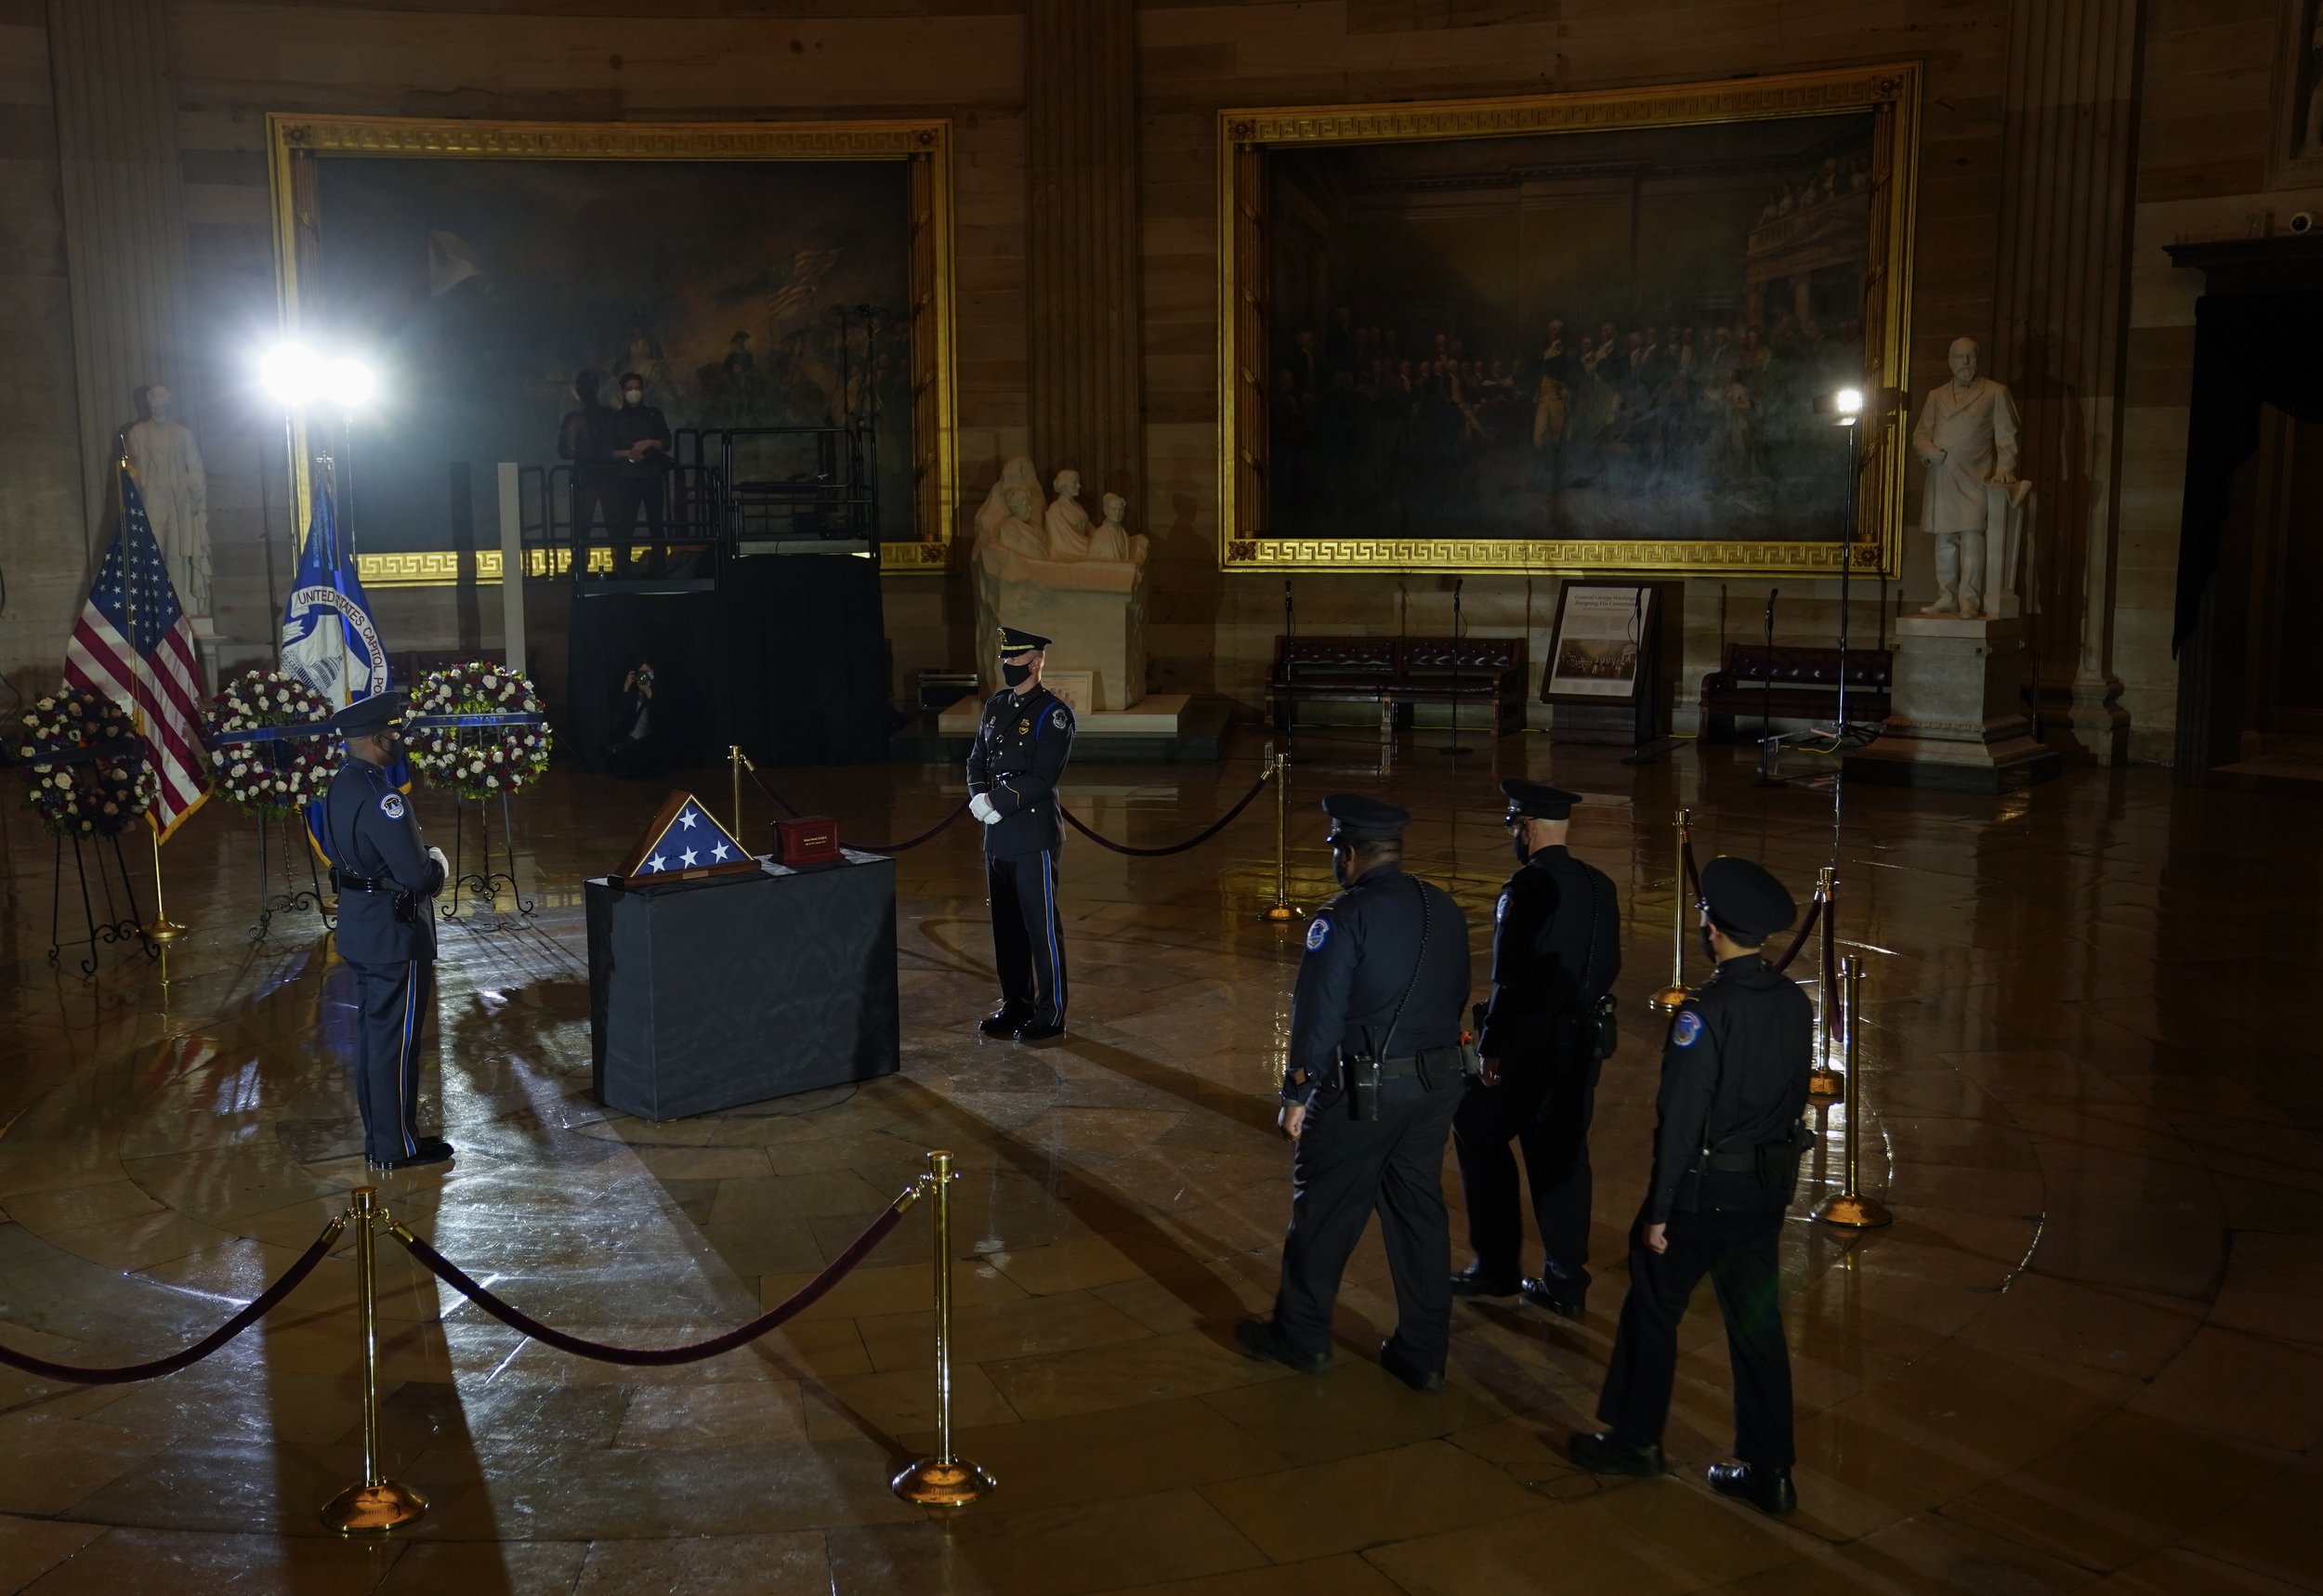  U.S. Capitol Police pay their respects before a ceremony memorializing U.S. Capitol Police Officer Brian D. Sicknick, 42, as he lies in honor in the Rotunda of the Capitol. Officer Sicknick was responding to the riot at the U.S. Capitol on Wednesday